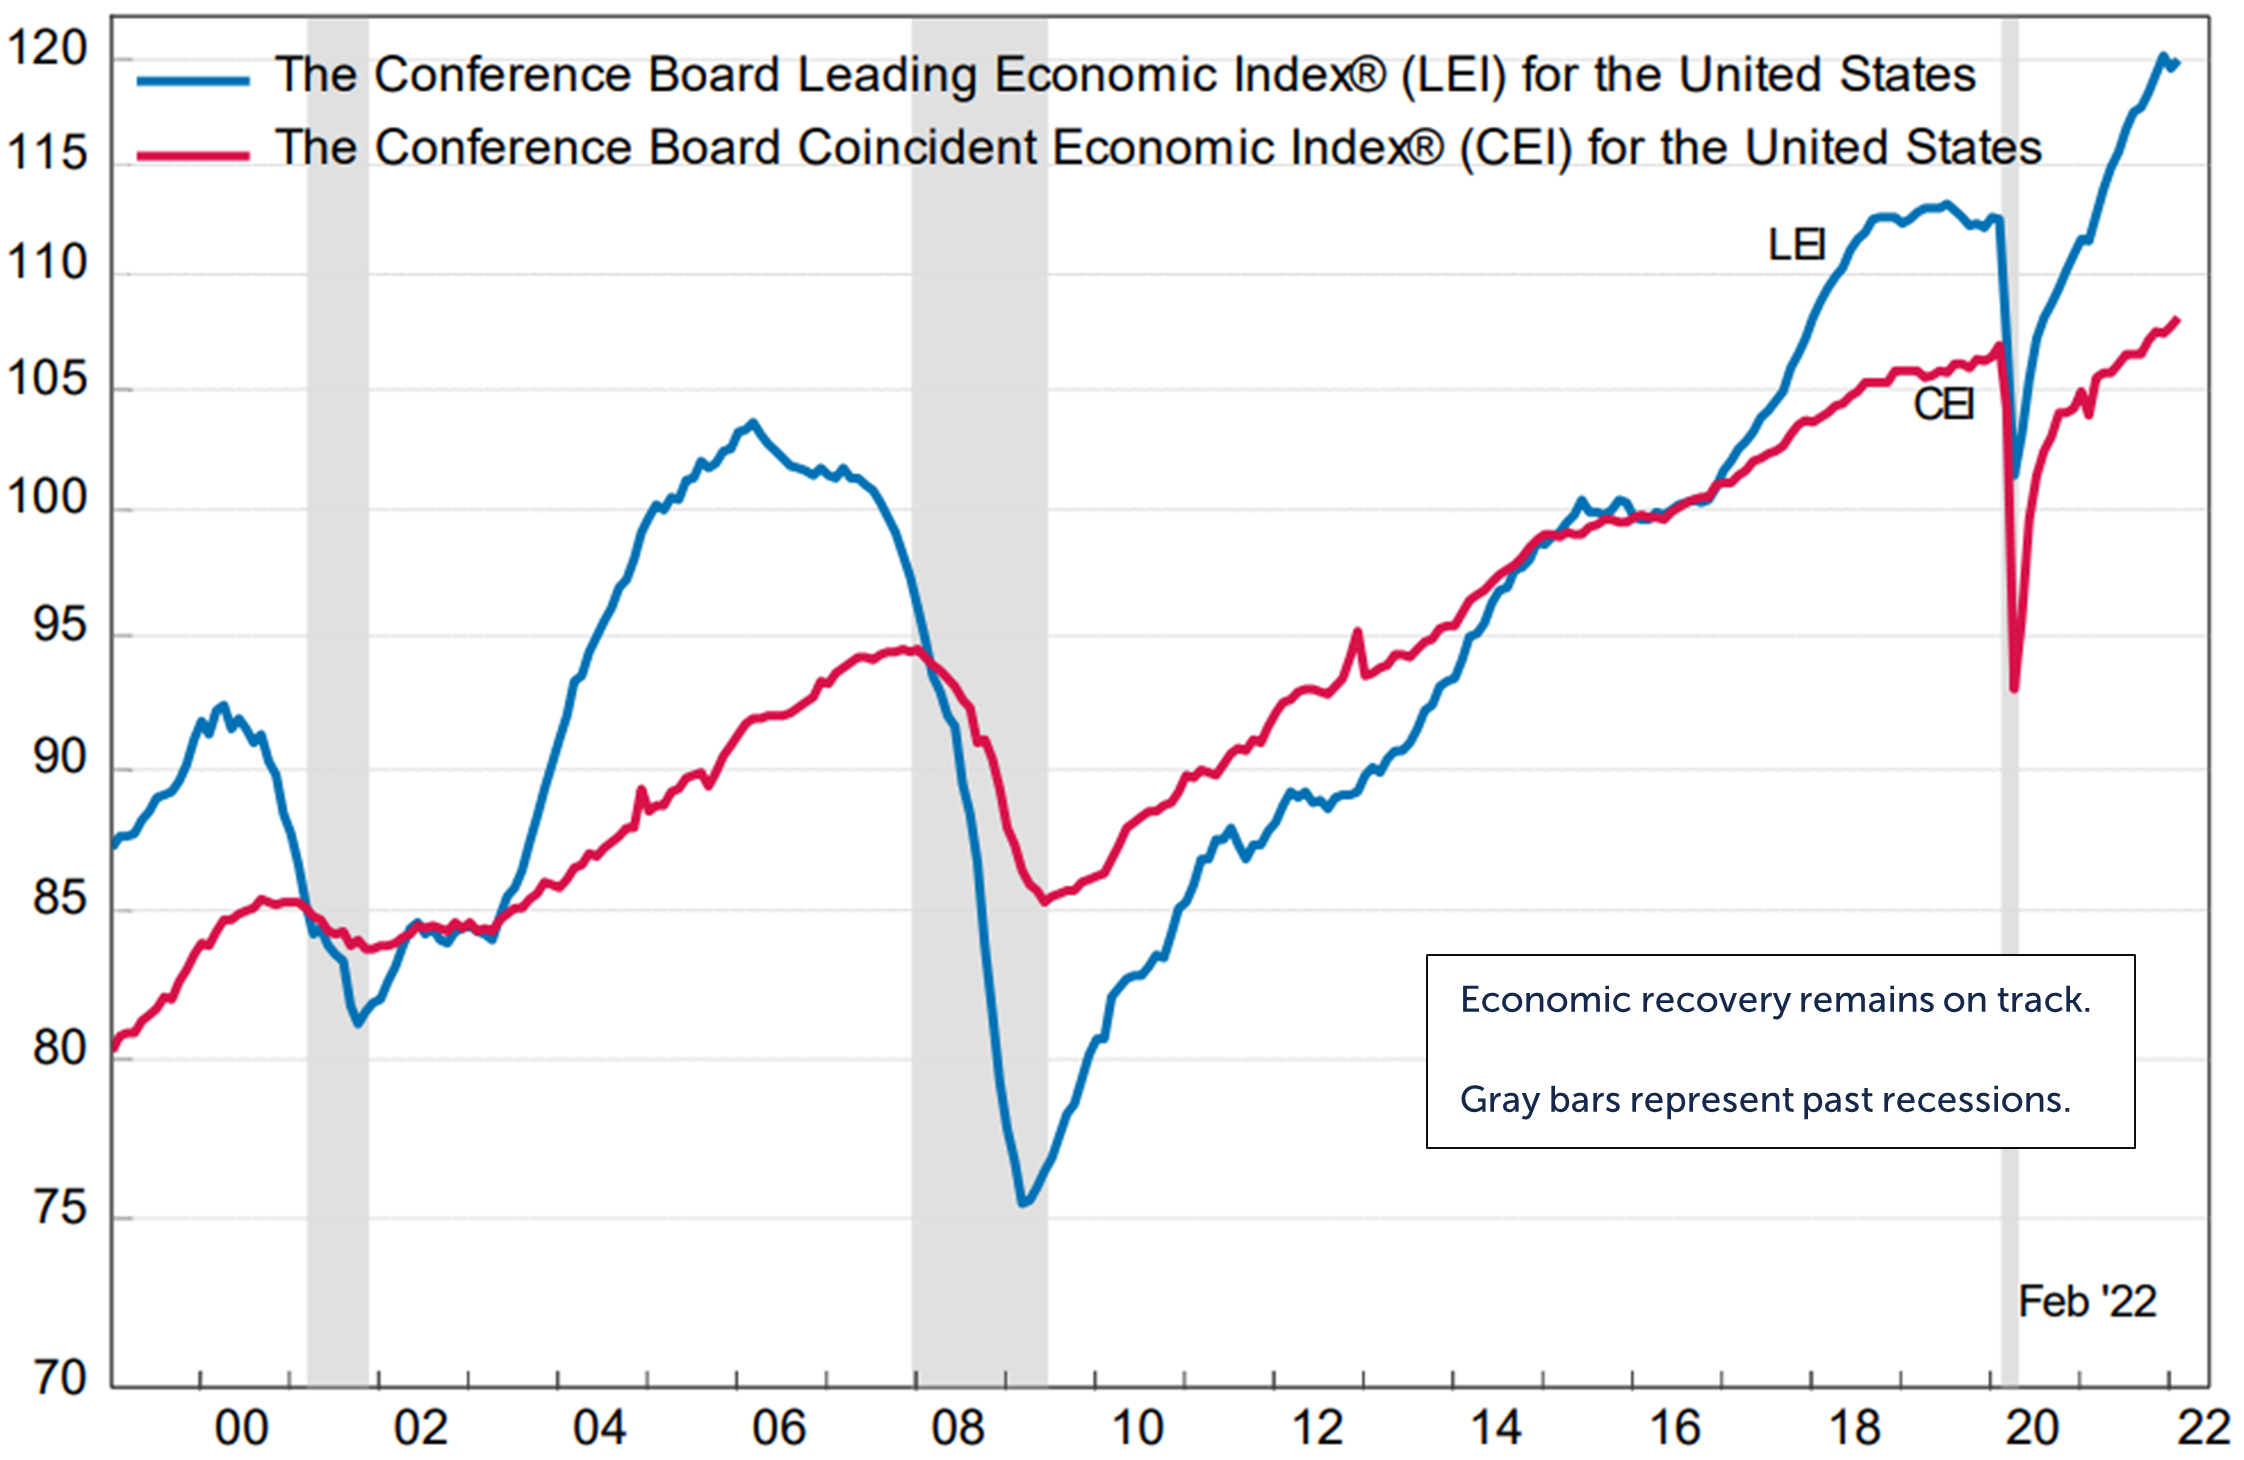 Line graph depicting The Conference Board Leading Economic Index® (LEI) for the United States and The Conference Board Coincident Economic Index® (CEI) for the United States